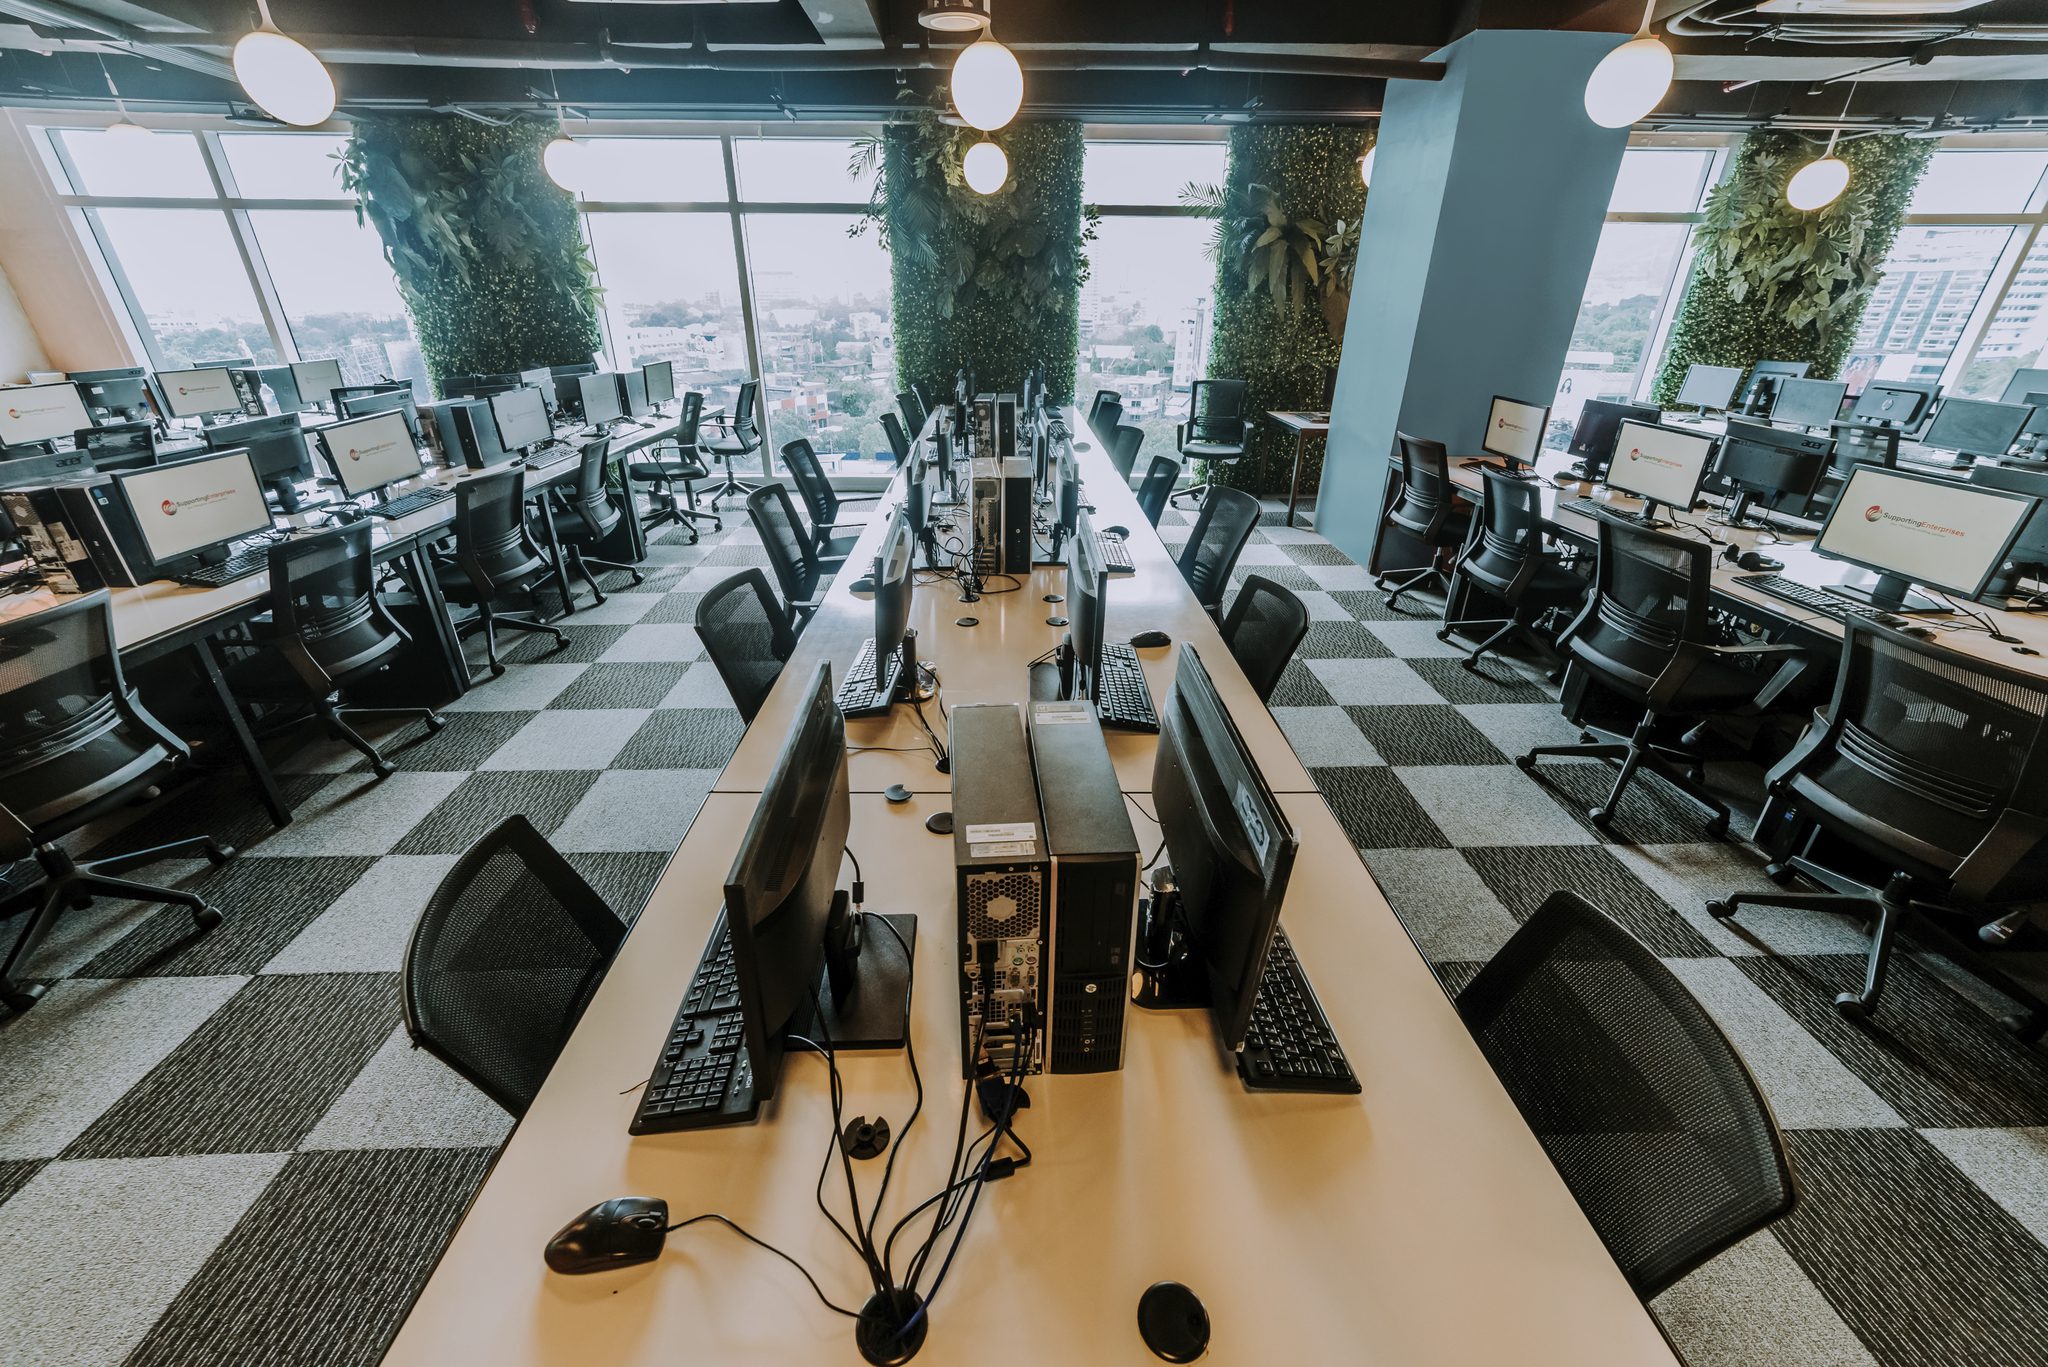 Call center chairs lined up in a checkered floor and wooden tables